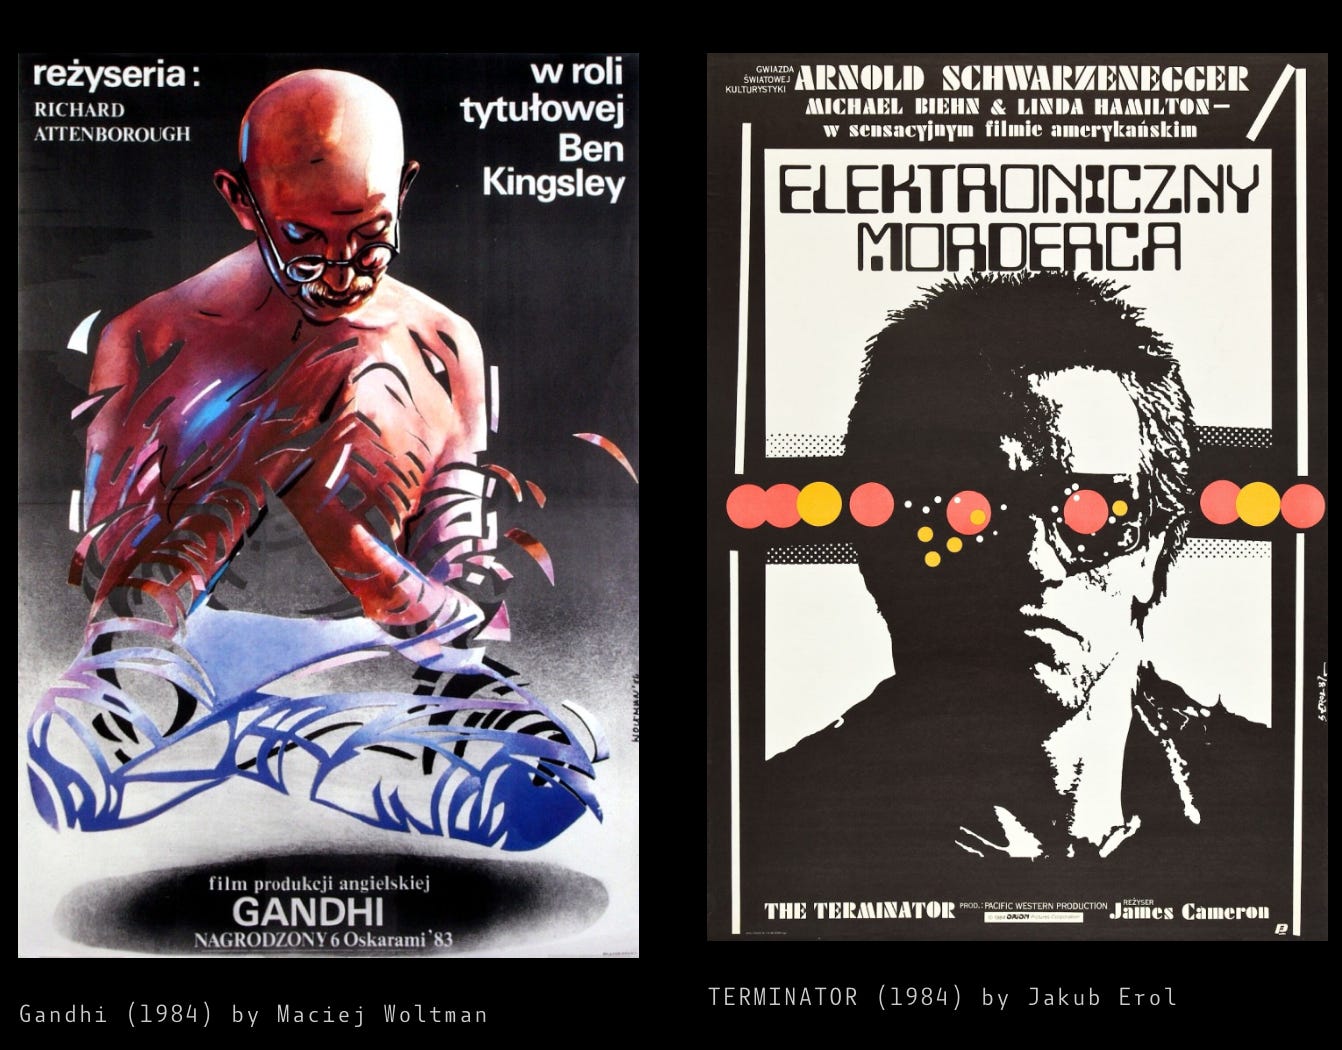  Two Polish movie posters. On the left, a stylised illustration for the film ‘Gandhi’ shows a bald figure in profile with wire-frame elements across the body. Text includes director Richard Attenborough and actor Ben Kingsley. On the right, a poster for ‘The Terminator’ features a high-contrast black and white portrait of a man with red sunglass lenses, surrounded by a geometric border. Both list 1984 as the year and the artists' names, Maciej Woltman and Jakub Erol, respectively.